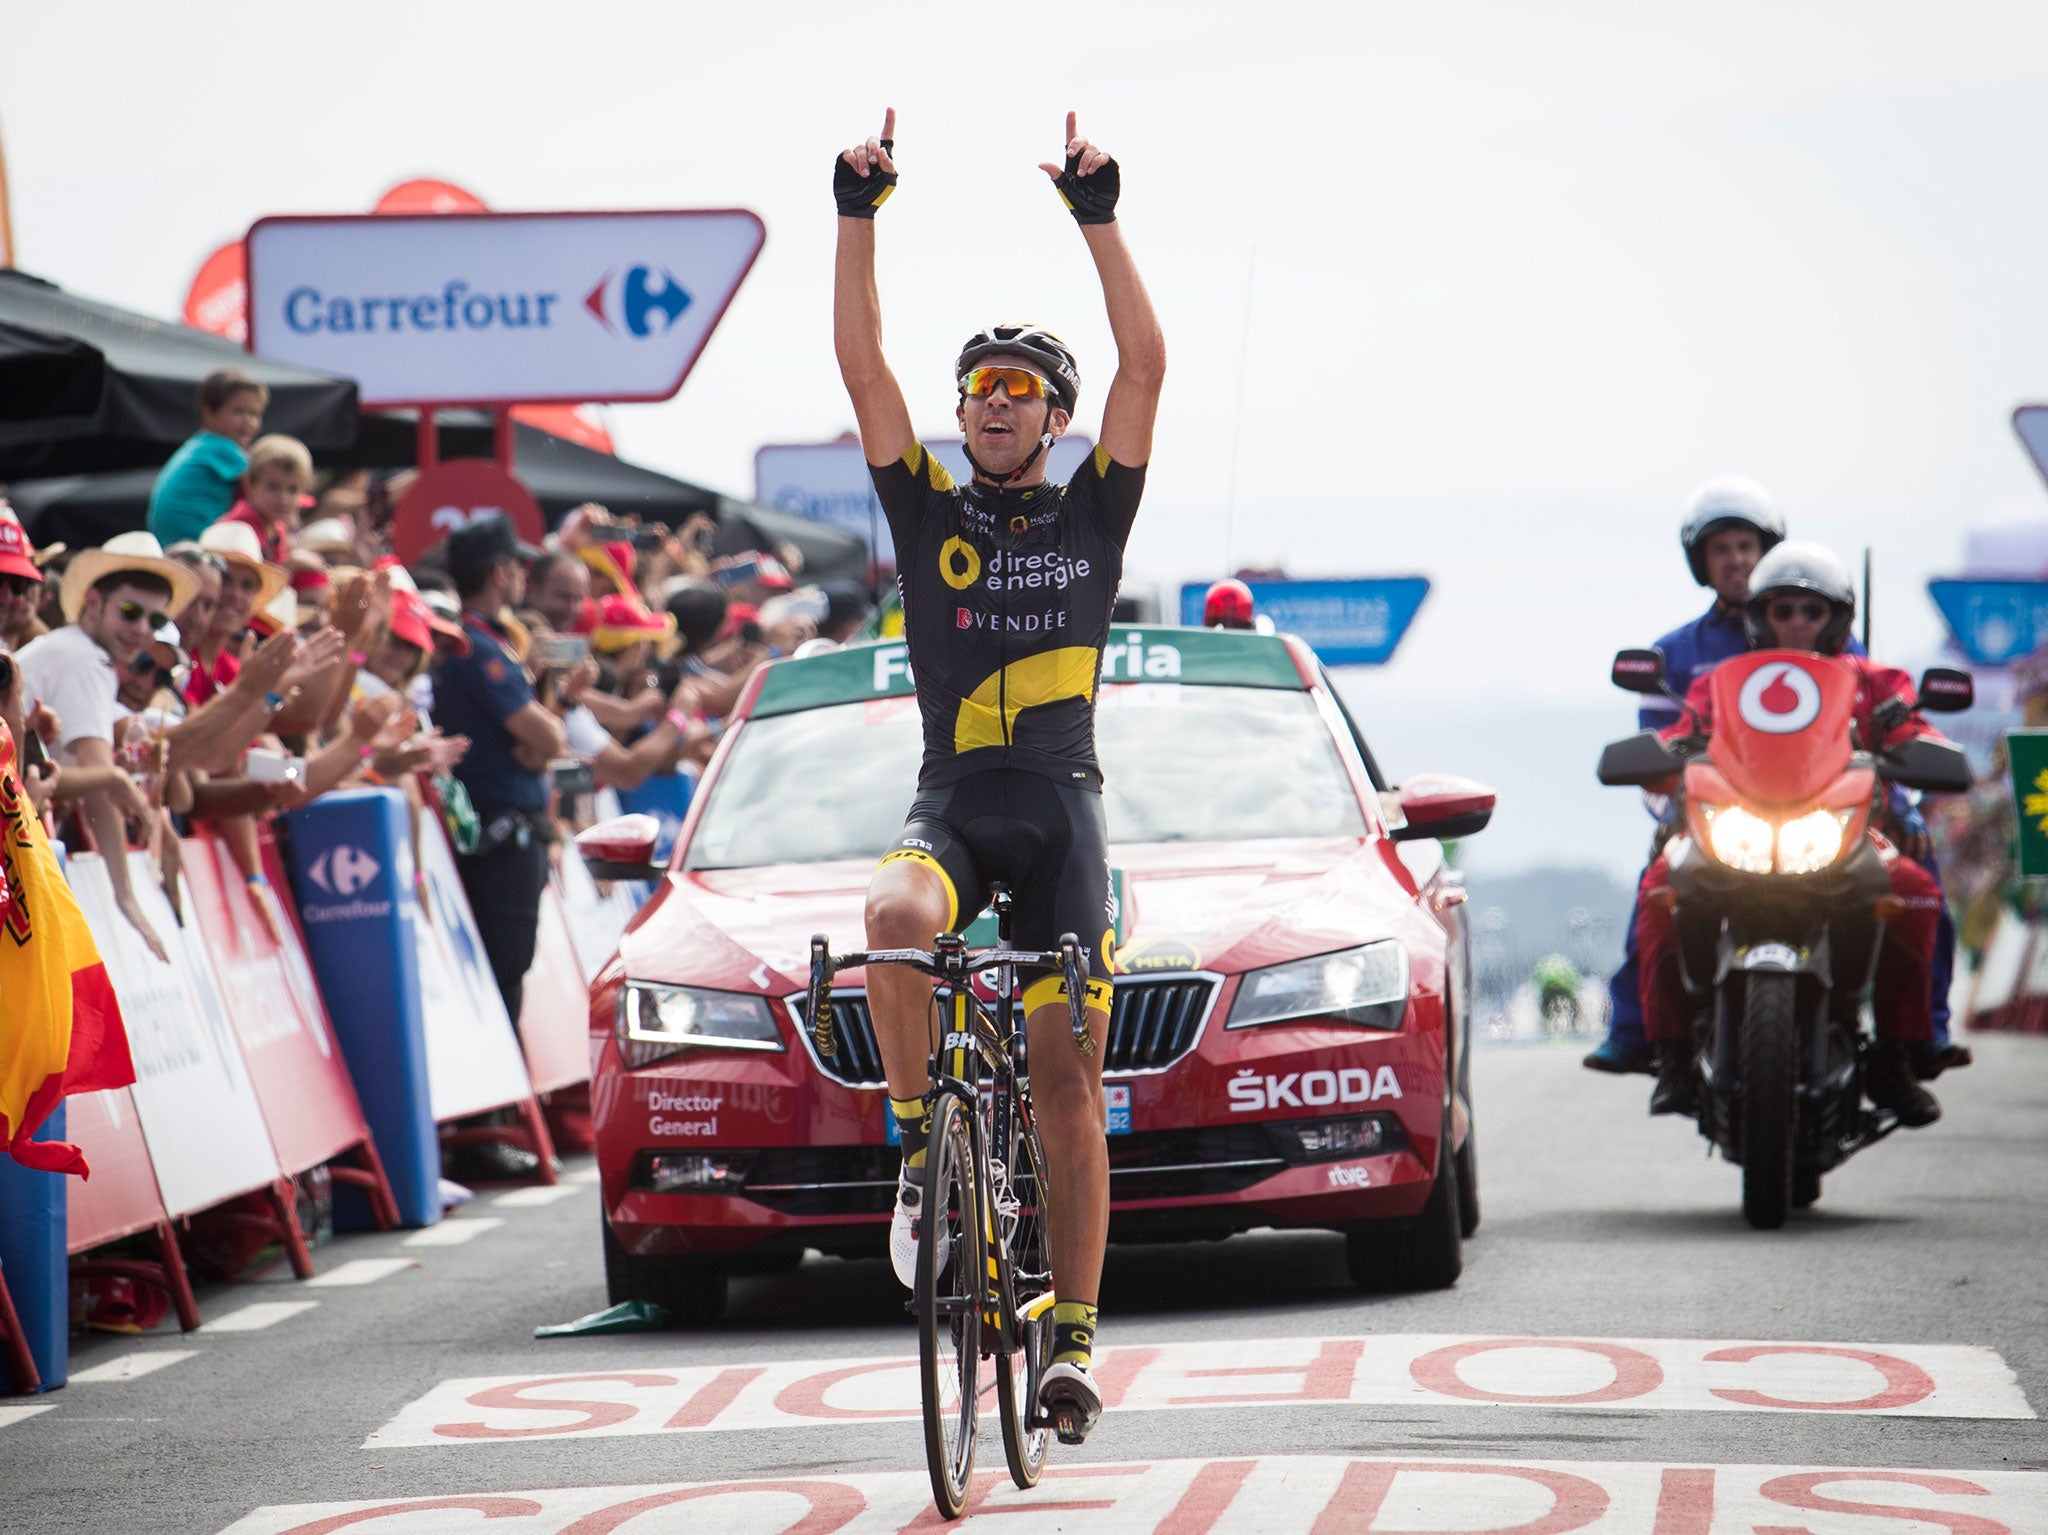 Lilian Calmejane celebrates his first major cycling victory